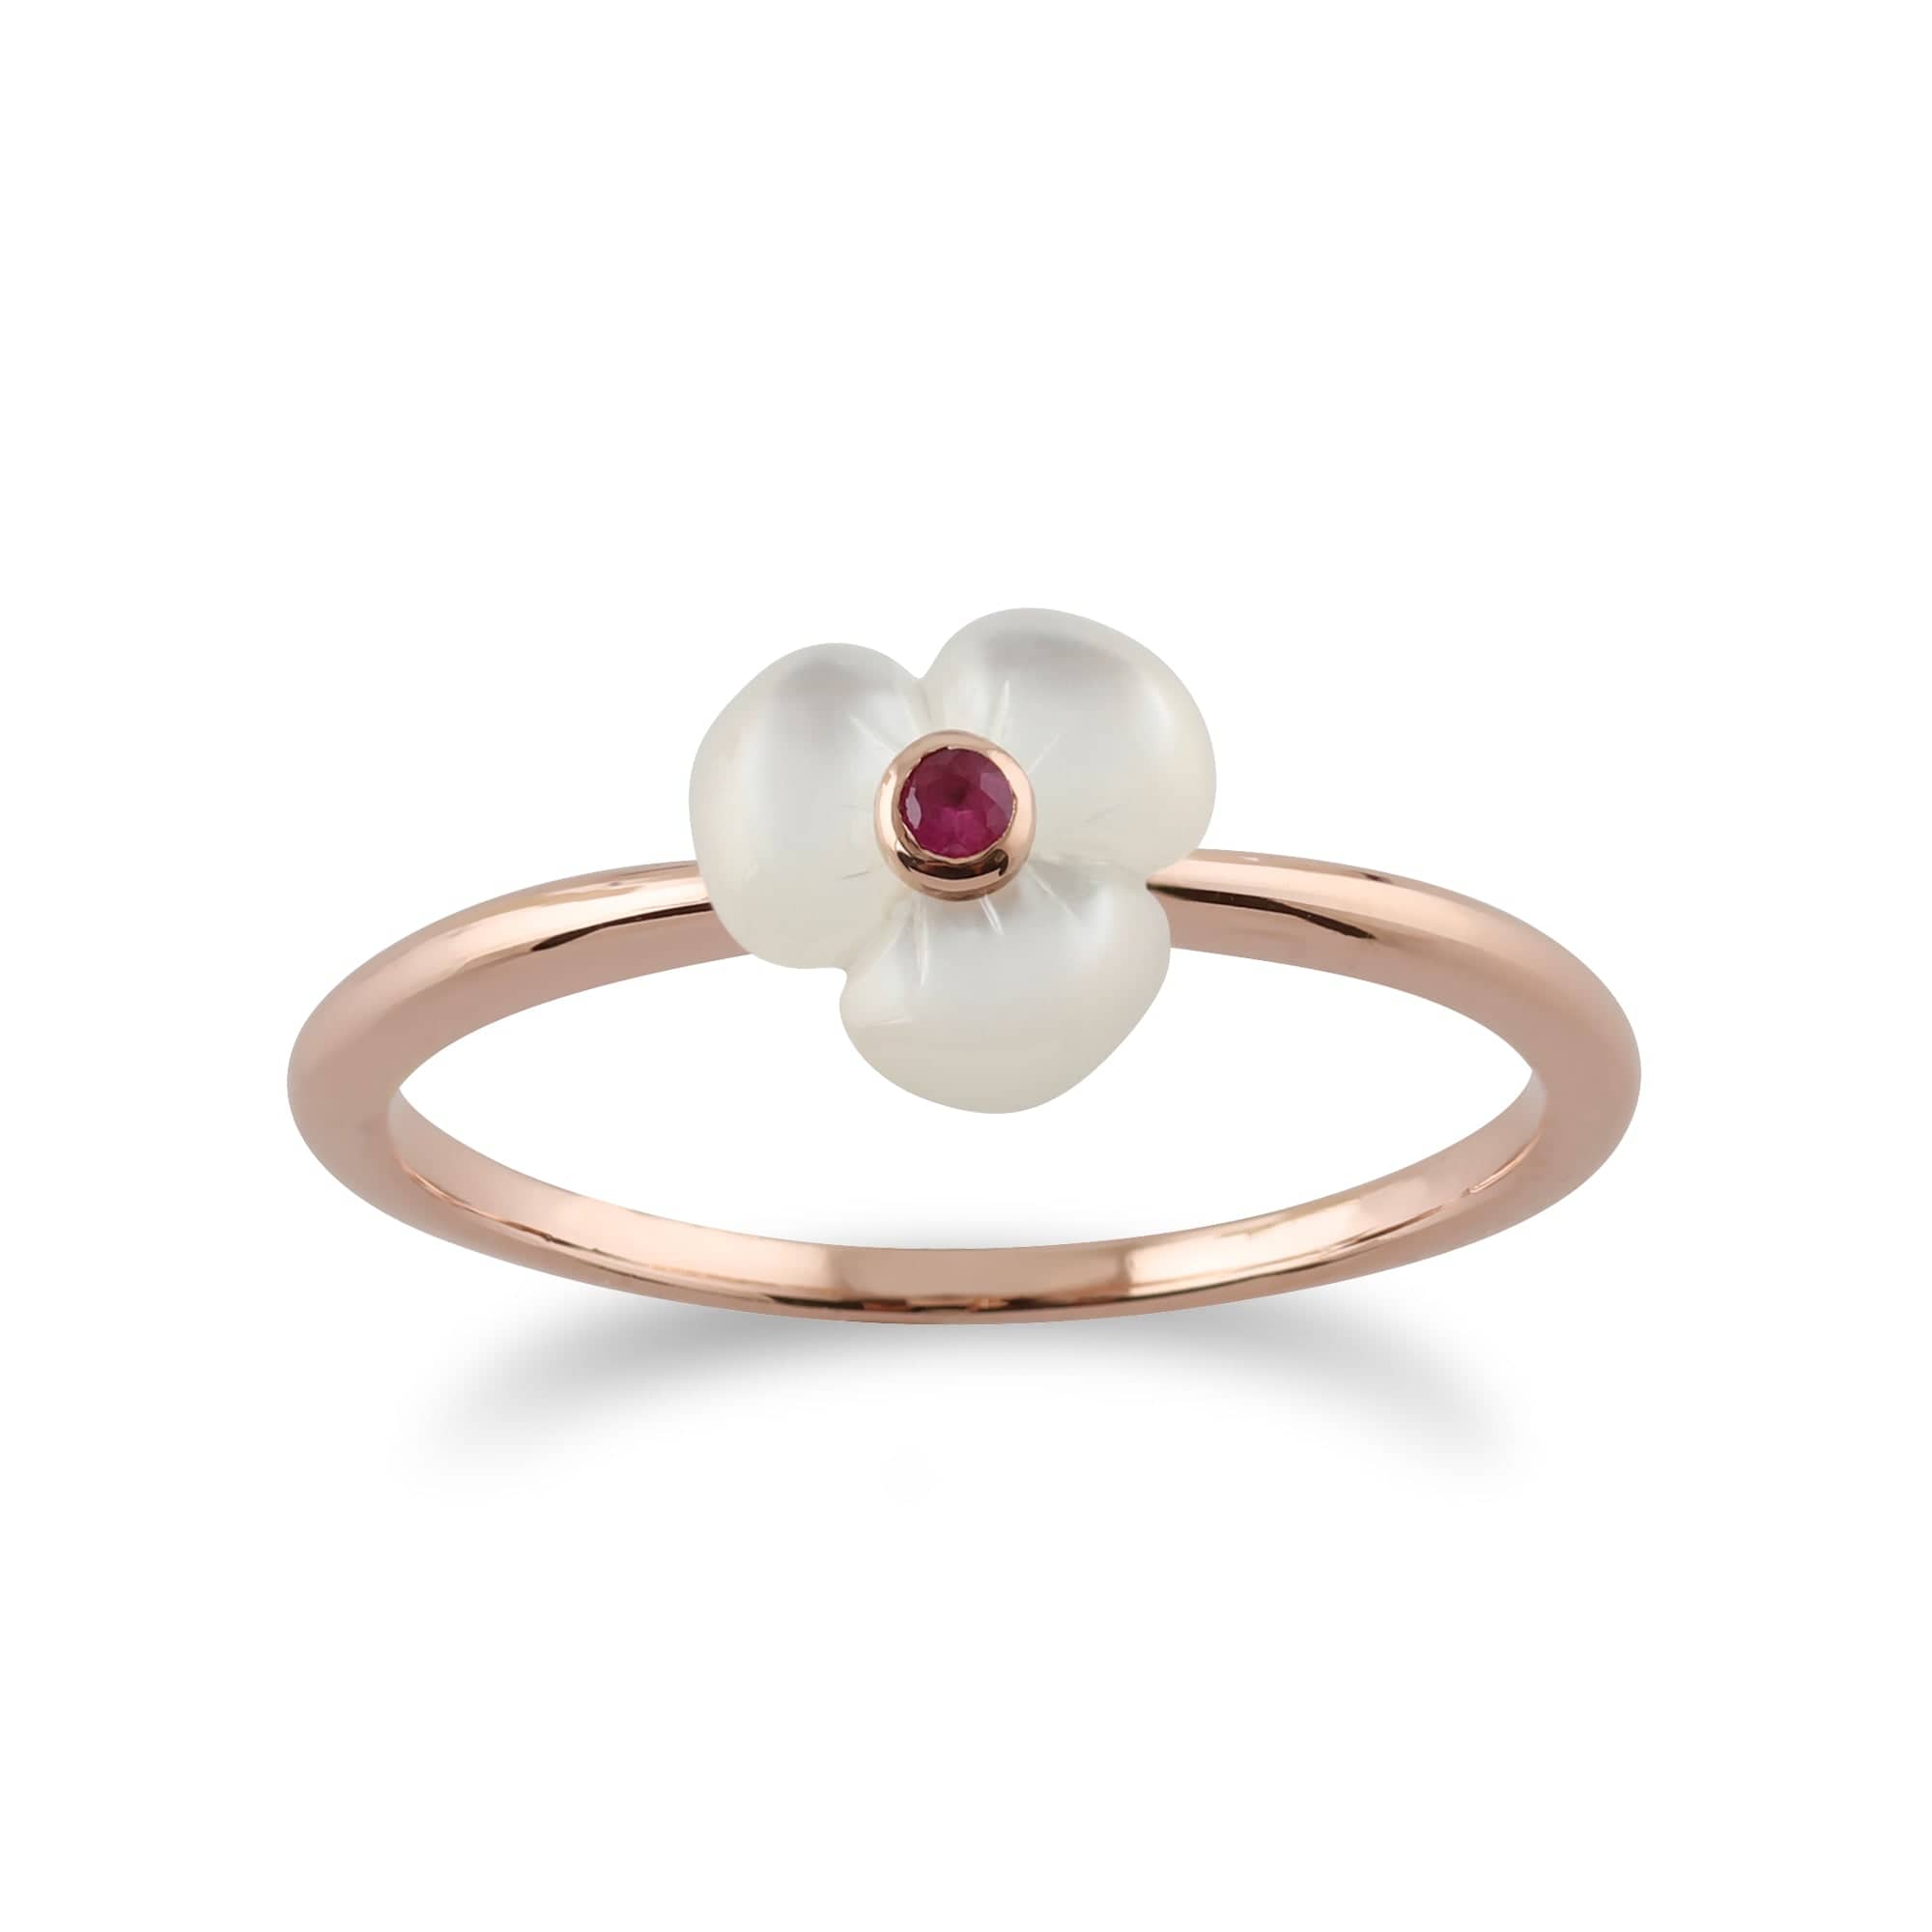 Floral Round Ruby & Mother of Pearl Poppy Ring in Rose Gold Plated 925 Sterling Silver - Gemondo